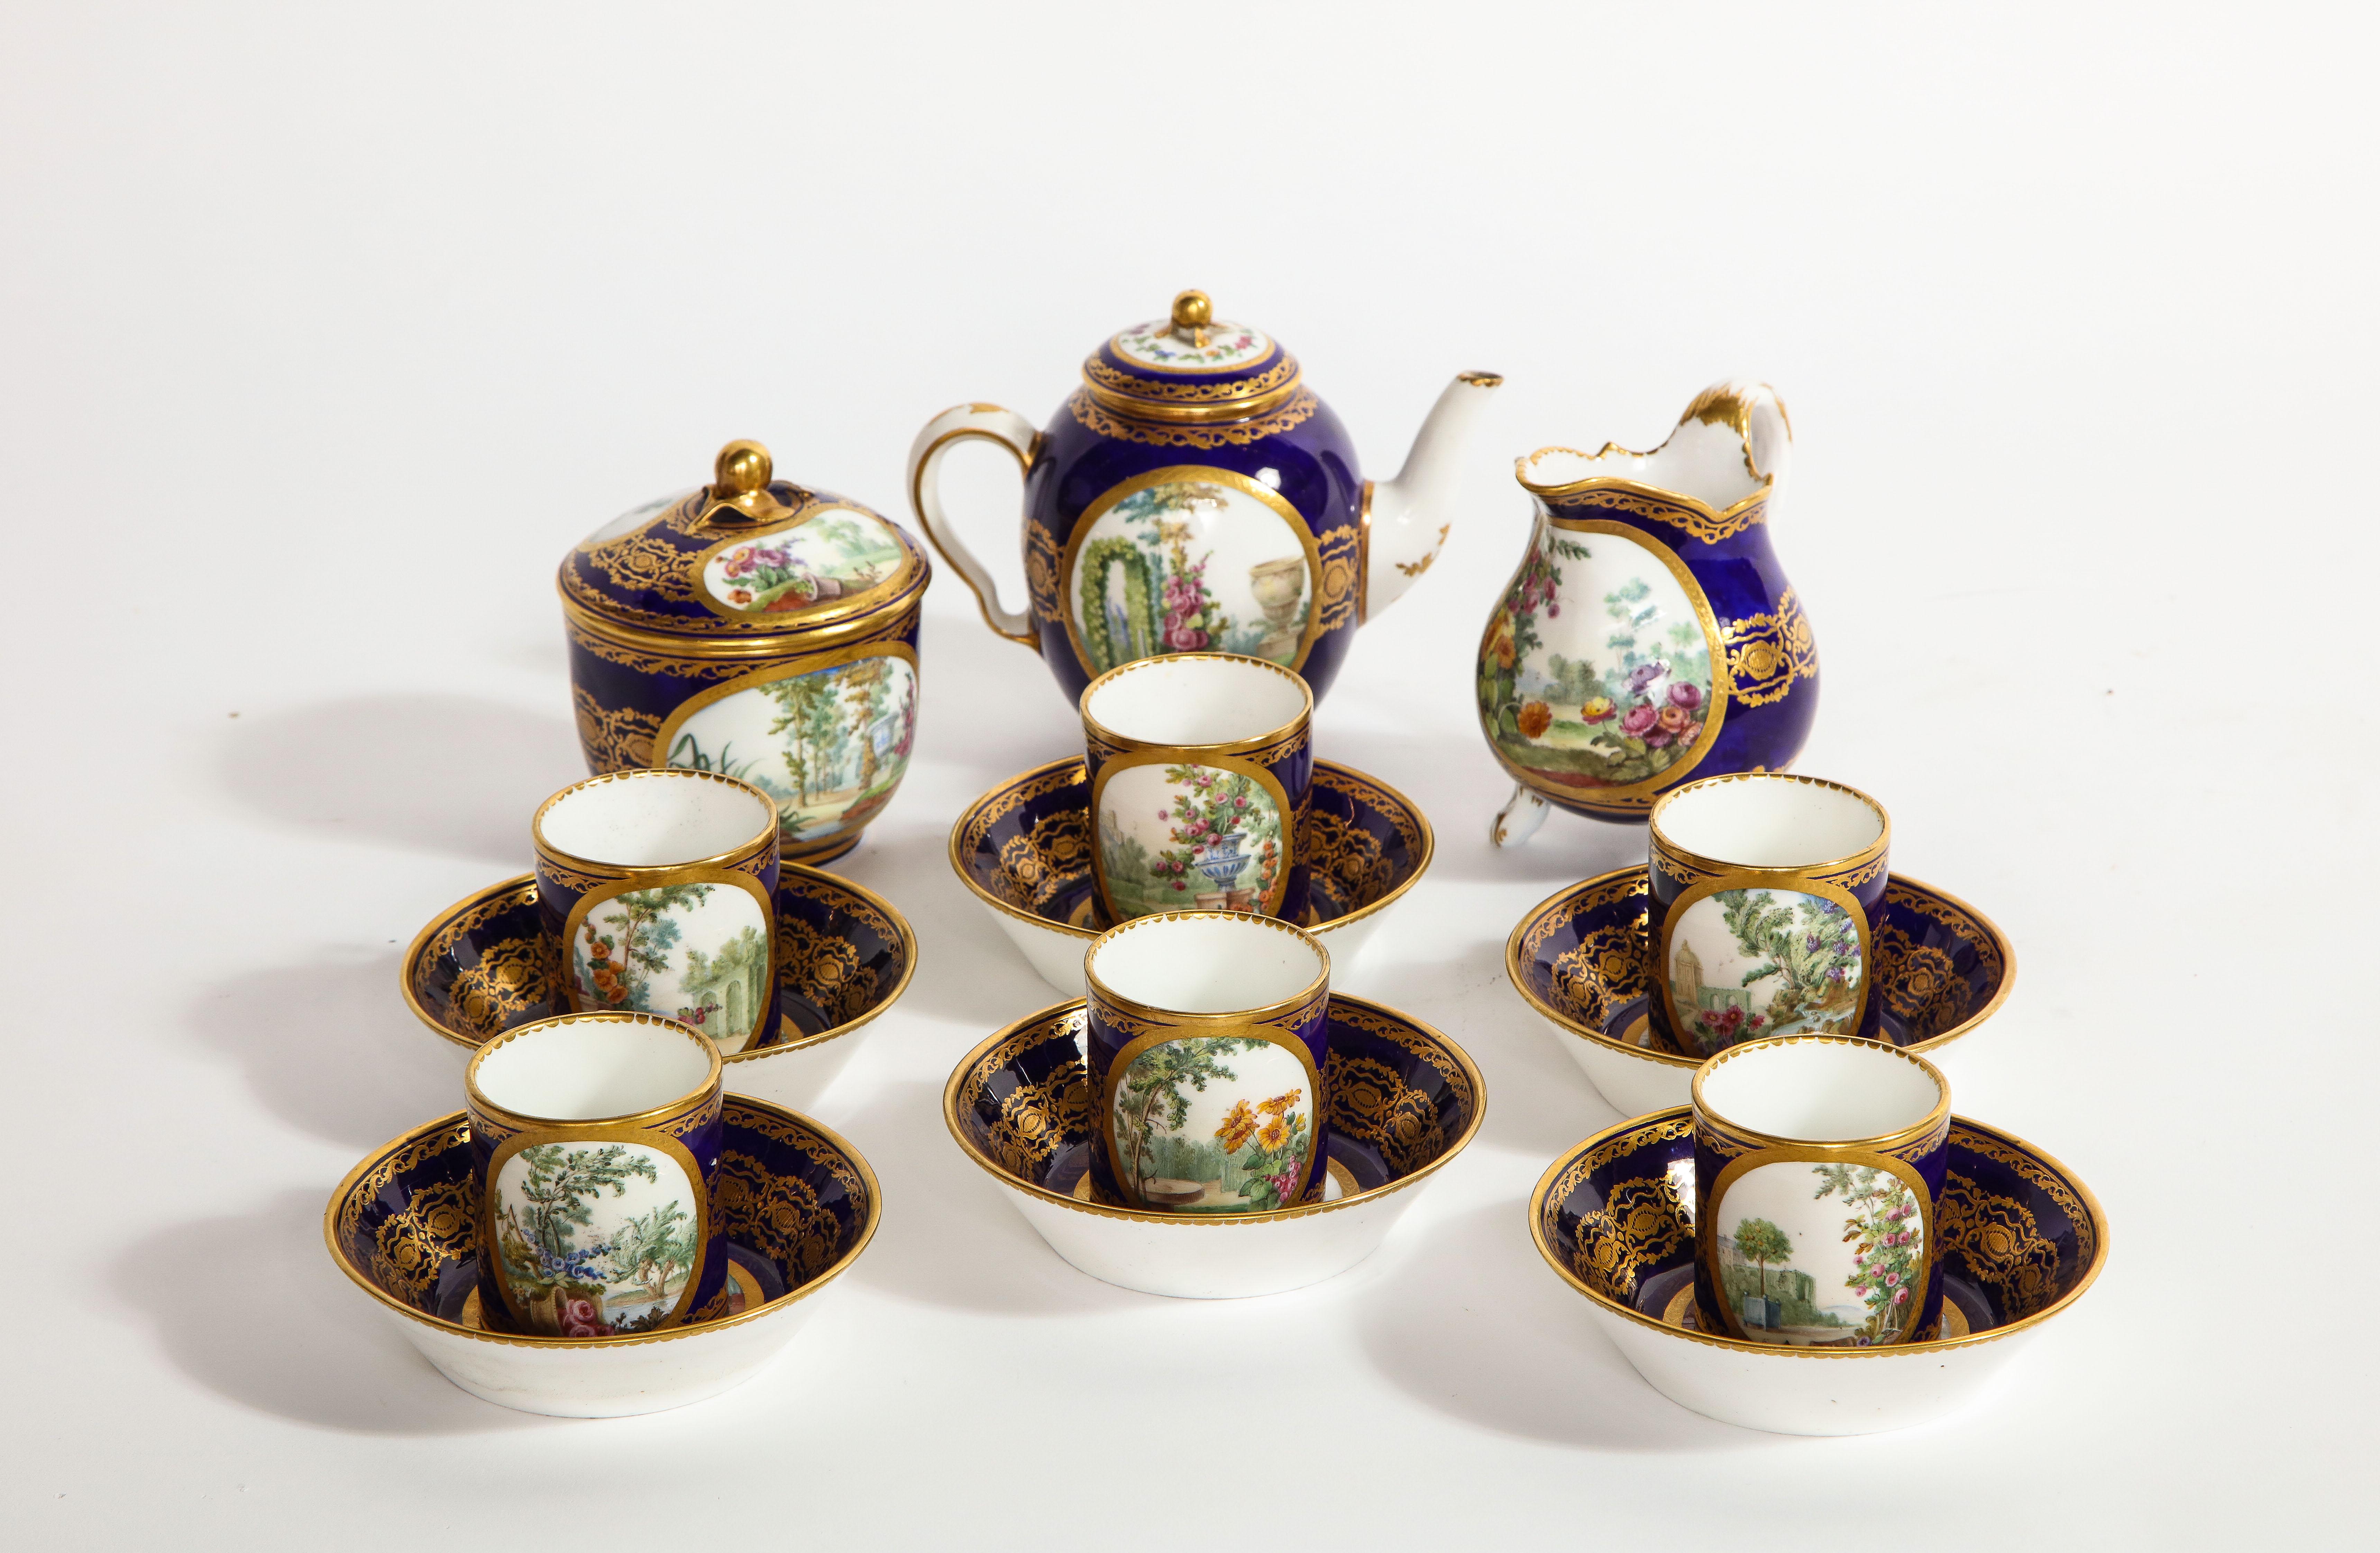 A marvelous Louis XVI period Sèvres Porcelain complete tea service, with date letter for 1782. Decorated with landscapes on a dark blue ‘beau bleu’ ground with elaborate gilt decoration. Comprising of six cups and saucers, a milk jug, teapot and